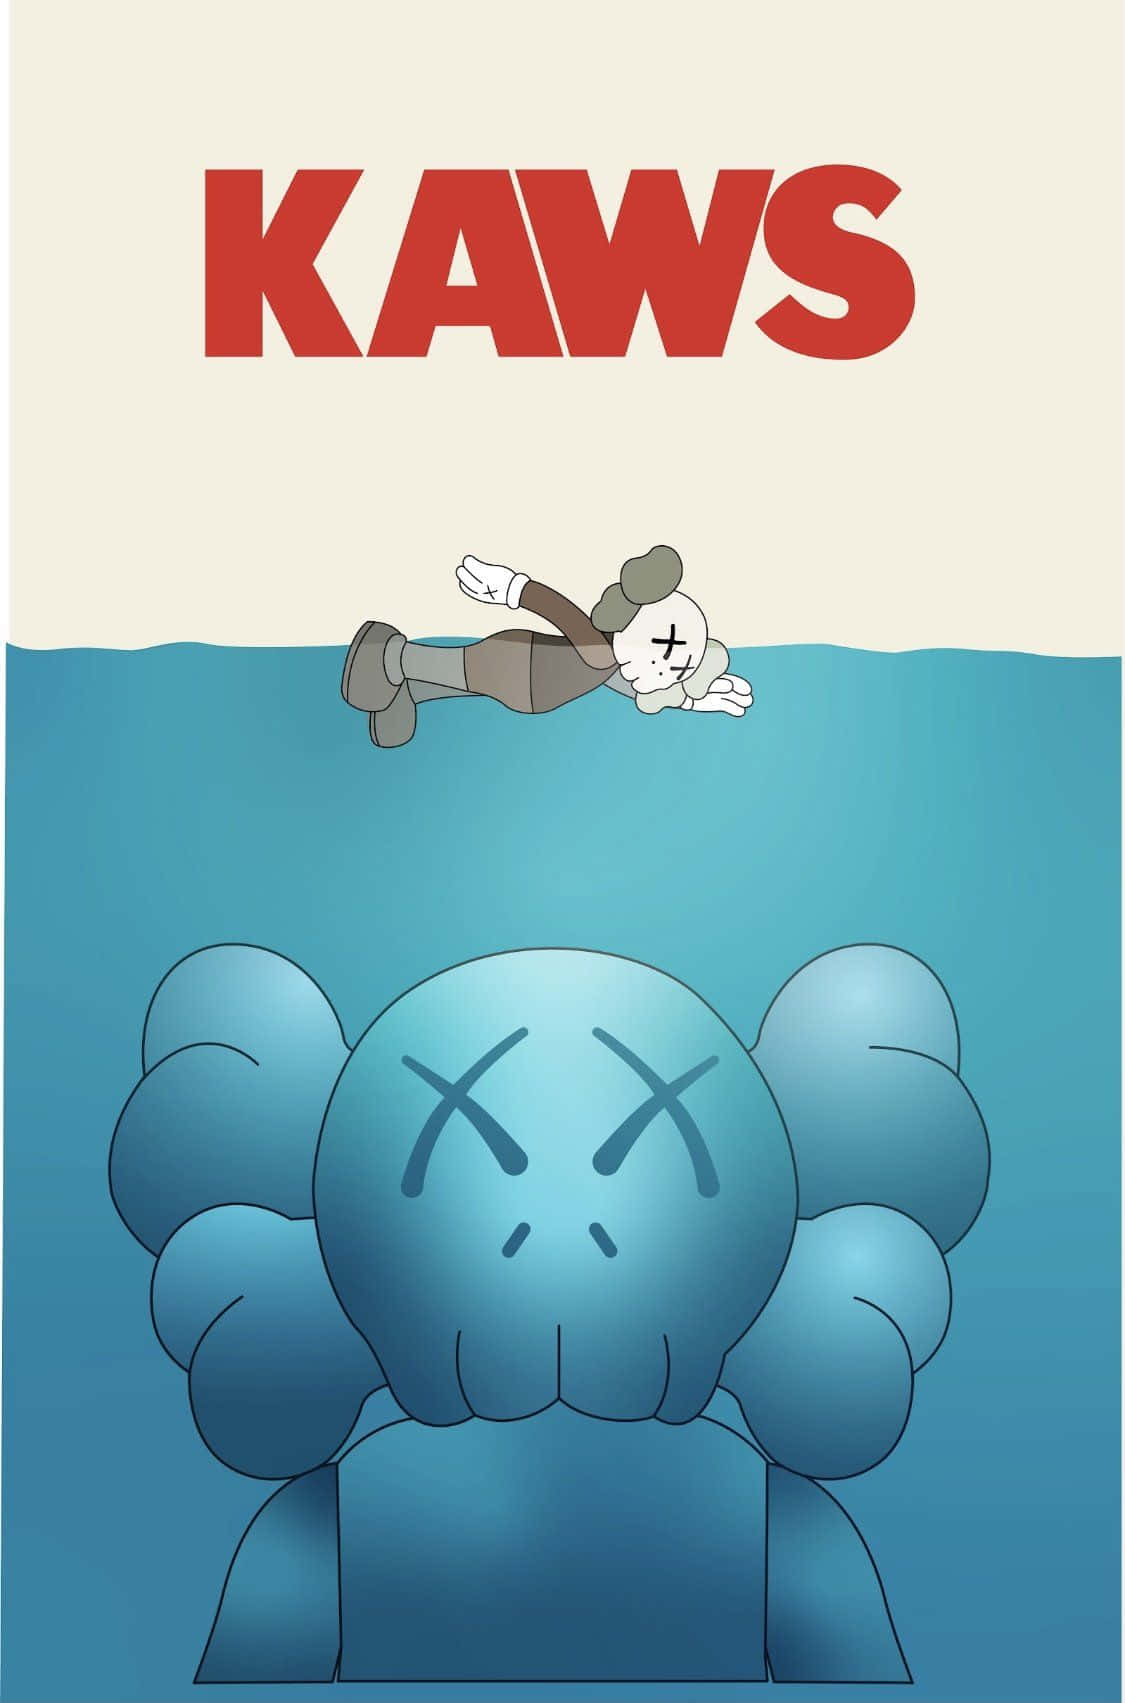 Always Keep It Cool With Kaws Wallpaper